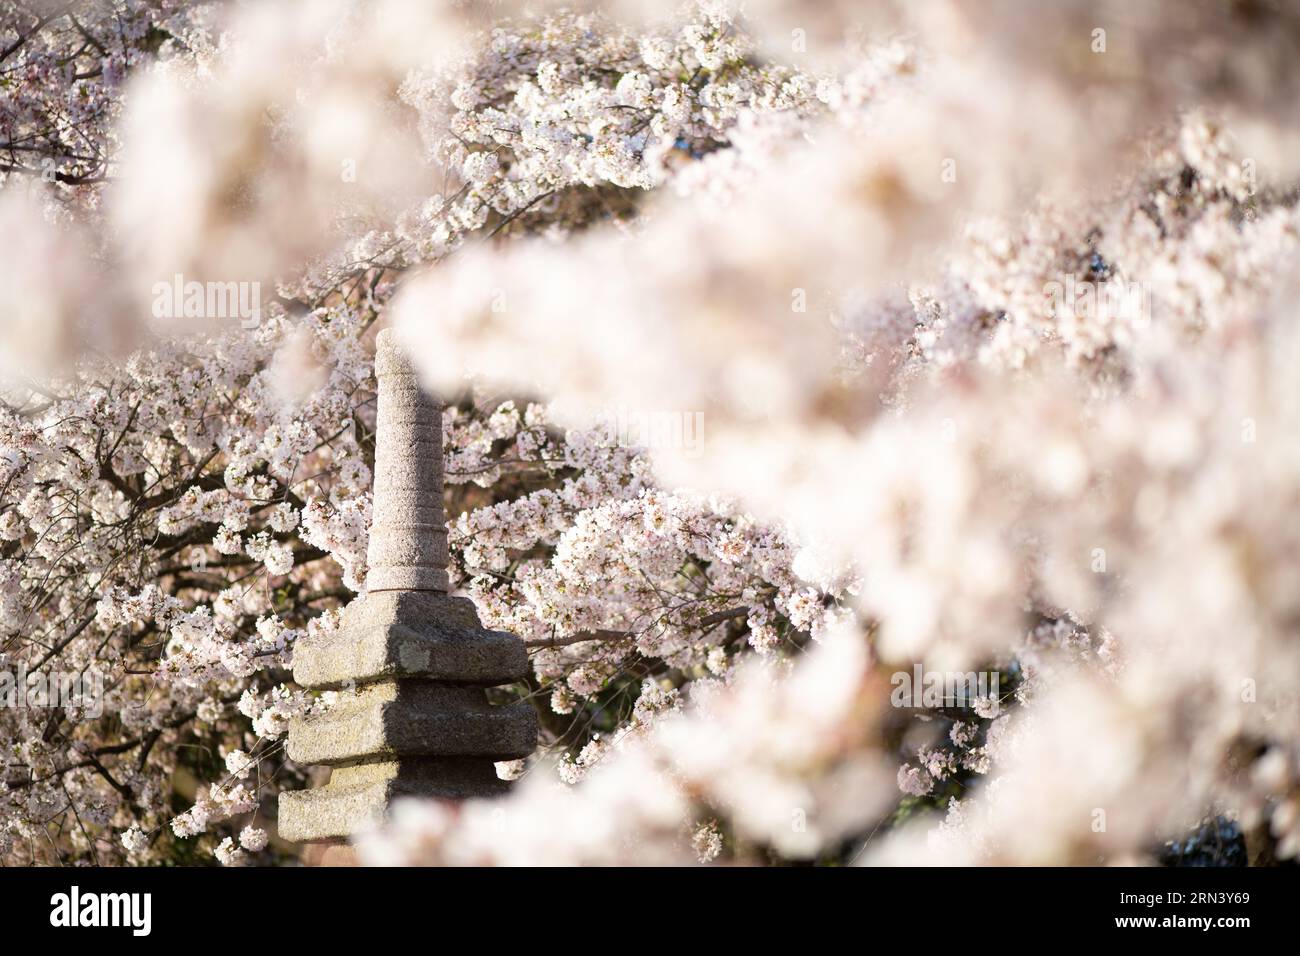 WASHINGTON DC, United States — The Japanese Pagoda stands surrounded by a flourish of cherry blossoms, a testament to the cultural ties between the U.S. and Japan. Located near the Tidal Basin, the stone monument adds a touch of traditional Japanese architecture amidst the sea of pink and white blossoms, echoing the historical connection between the two nations. Stock Photo